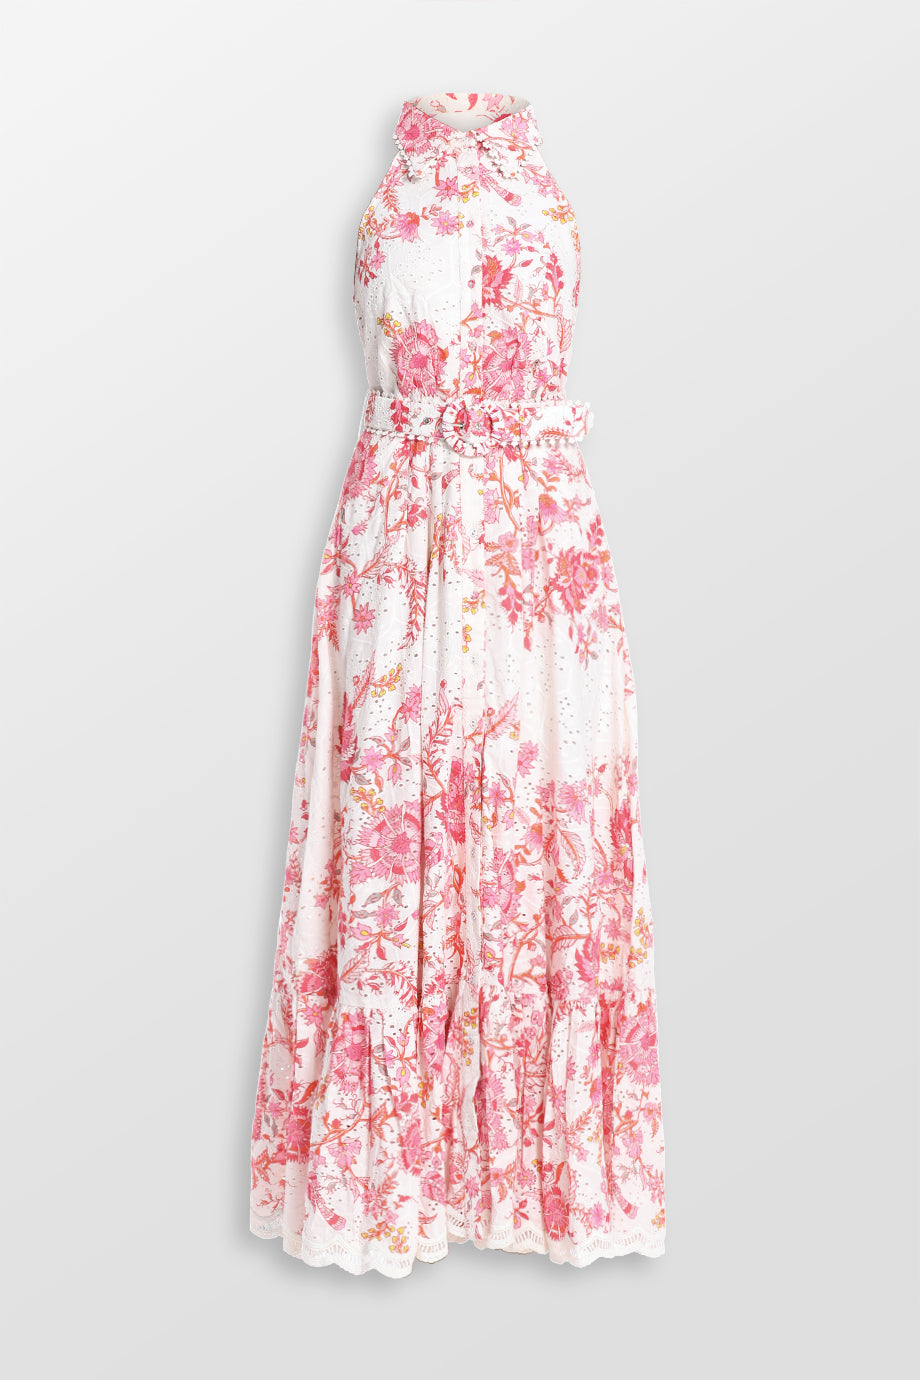 Floral Maxi Dress With Buckle Belt